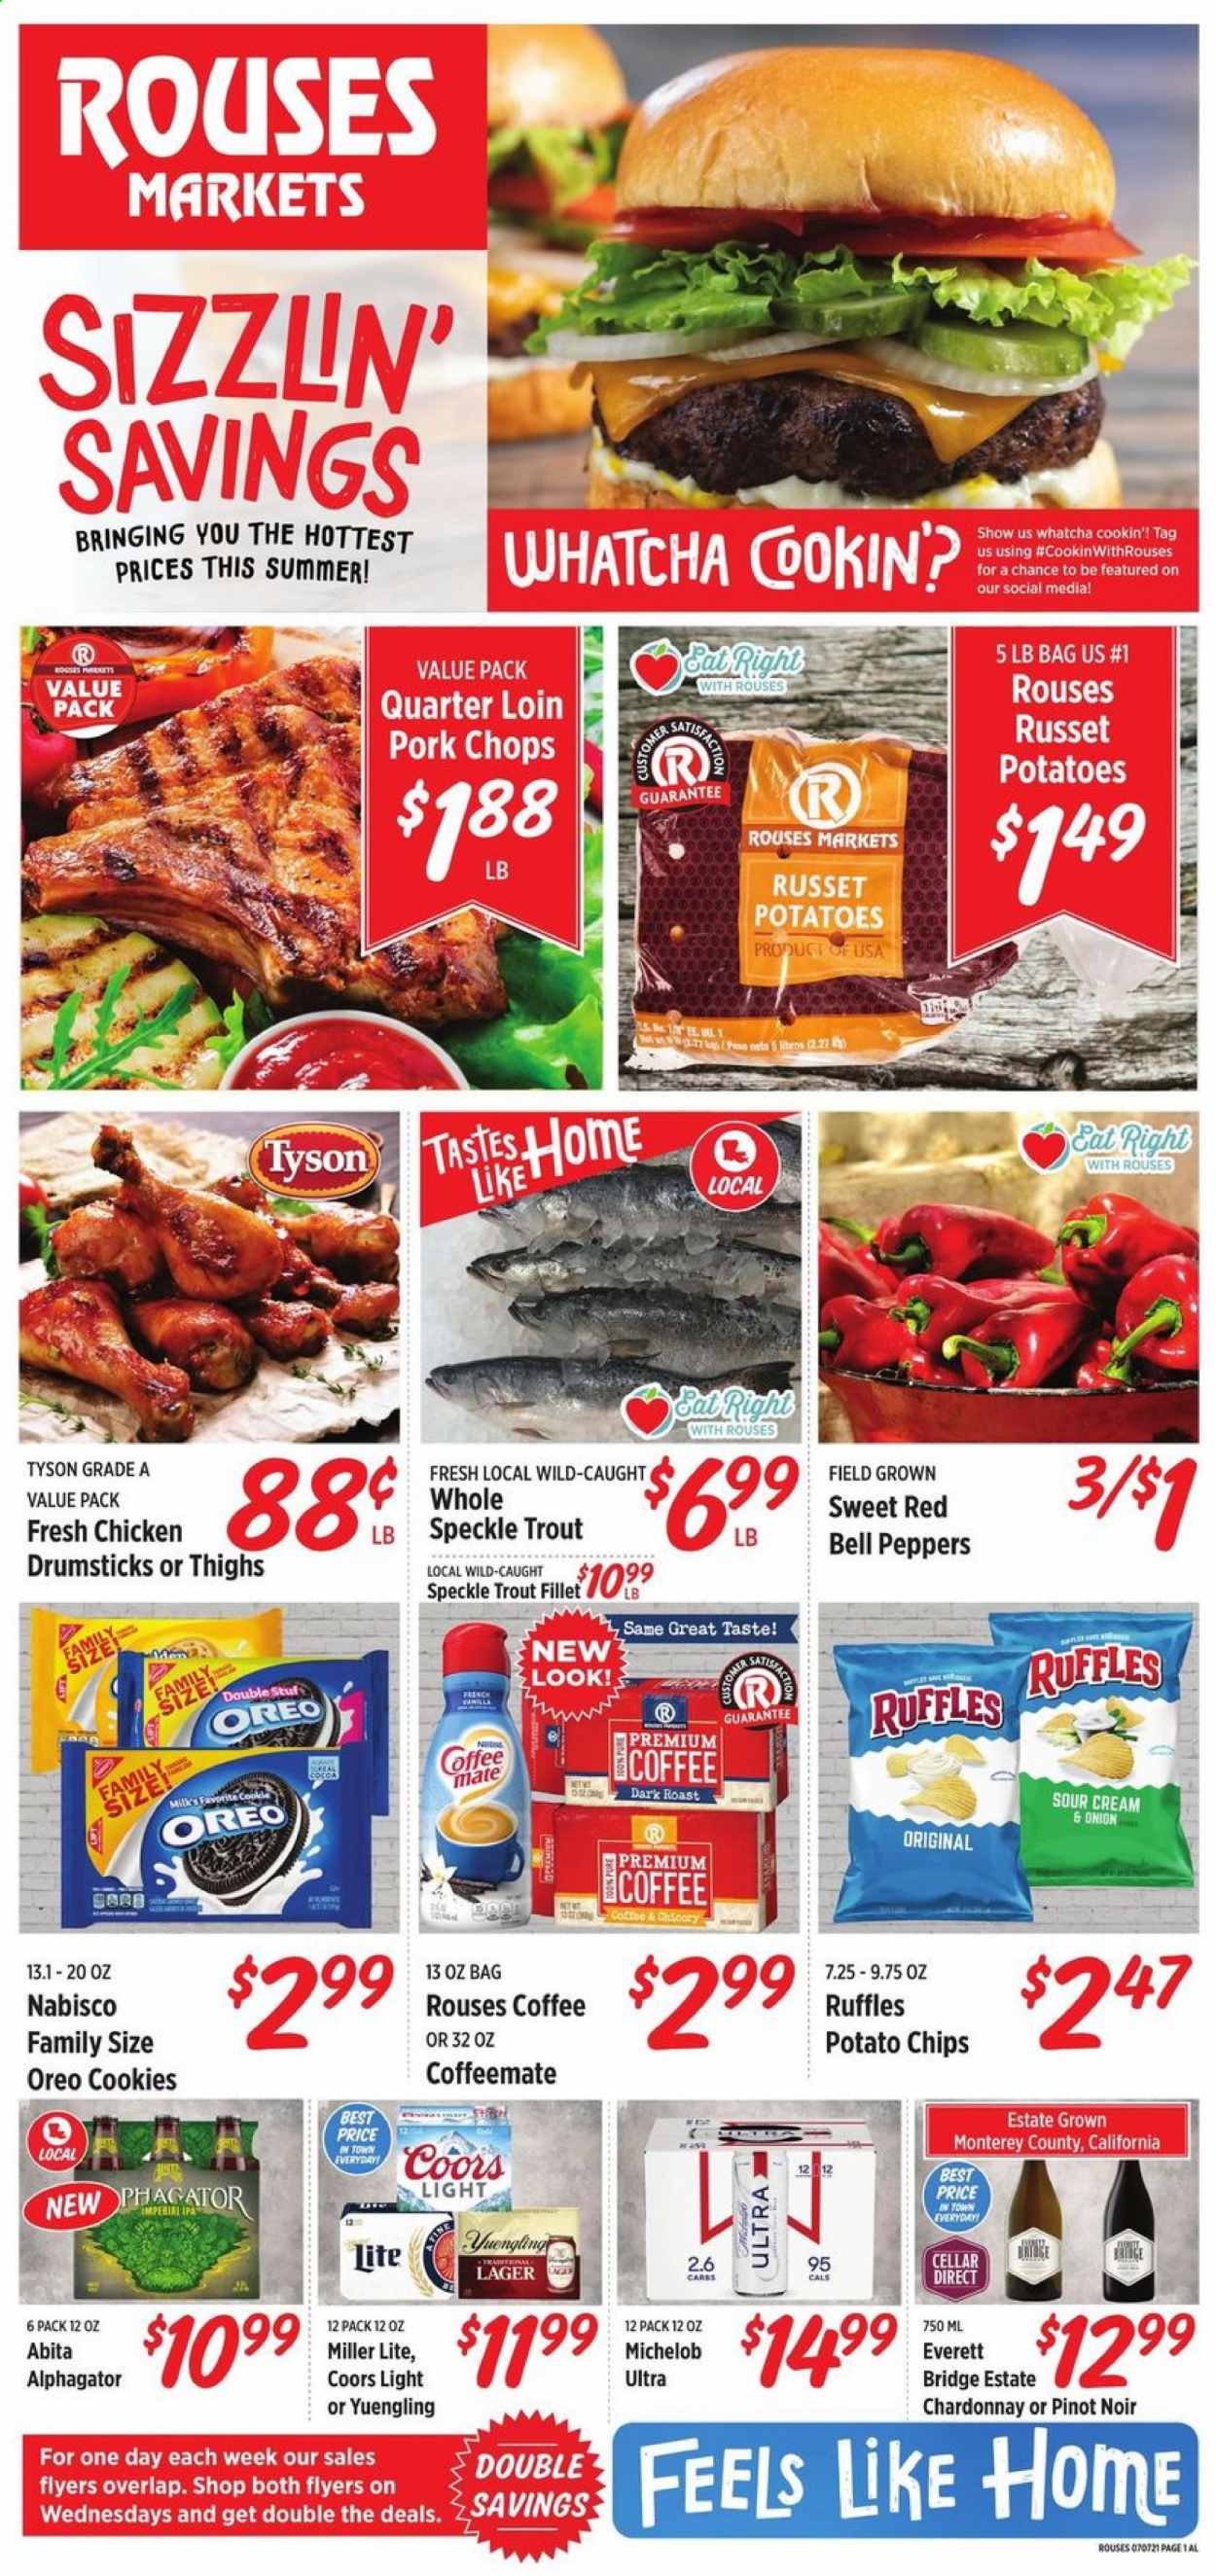 thumbnail - Rouses Markets Flyer - 07/07/2021 - 07/14/2021 - Sales products - Miller Lite, Coors, Yuengling, Michelob, bell peppers, russet potatoes, peppers, trout, Oreo, Coffee-Mate, cookies, potato chips, chips, Ruffles, cocoa, red wine, white wine, Chardonnay, wine, Pinot Noir, beer, Lager, IPA, pork chops, pork meat. Page 1.